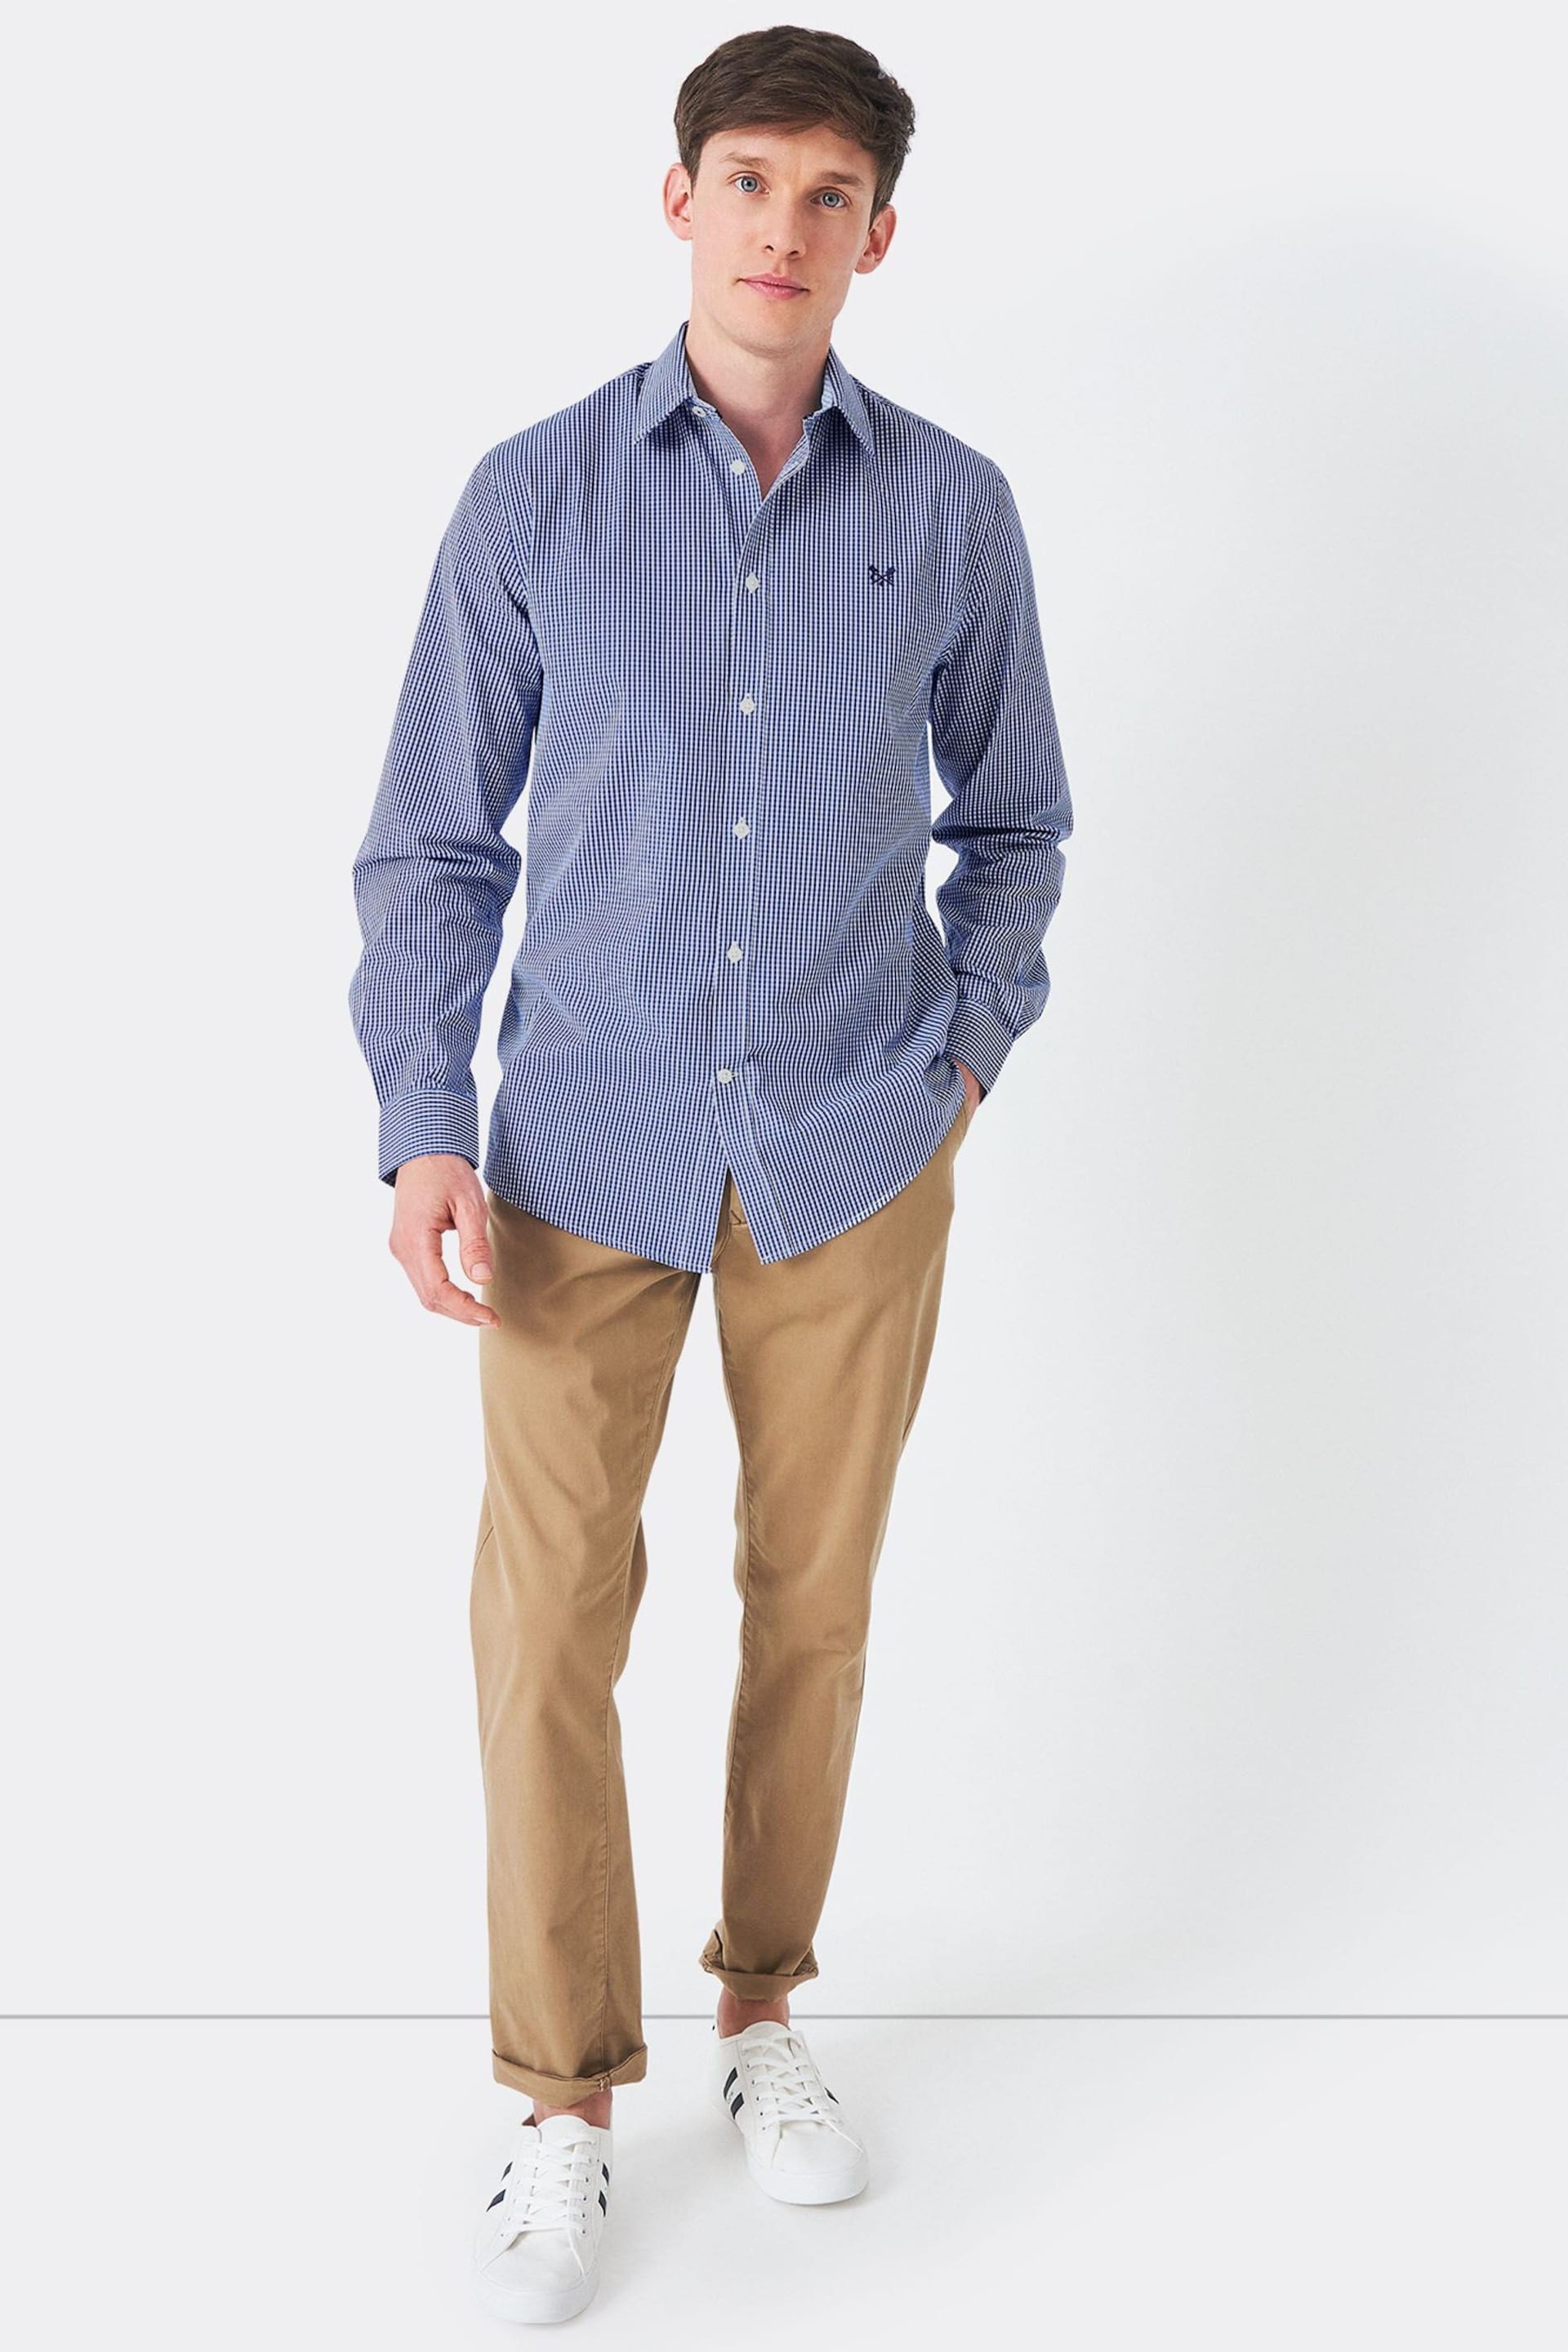 Crew Clothing Classic Fit Micro Gingham Shirt - Image 3 of 4